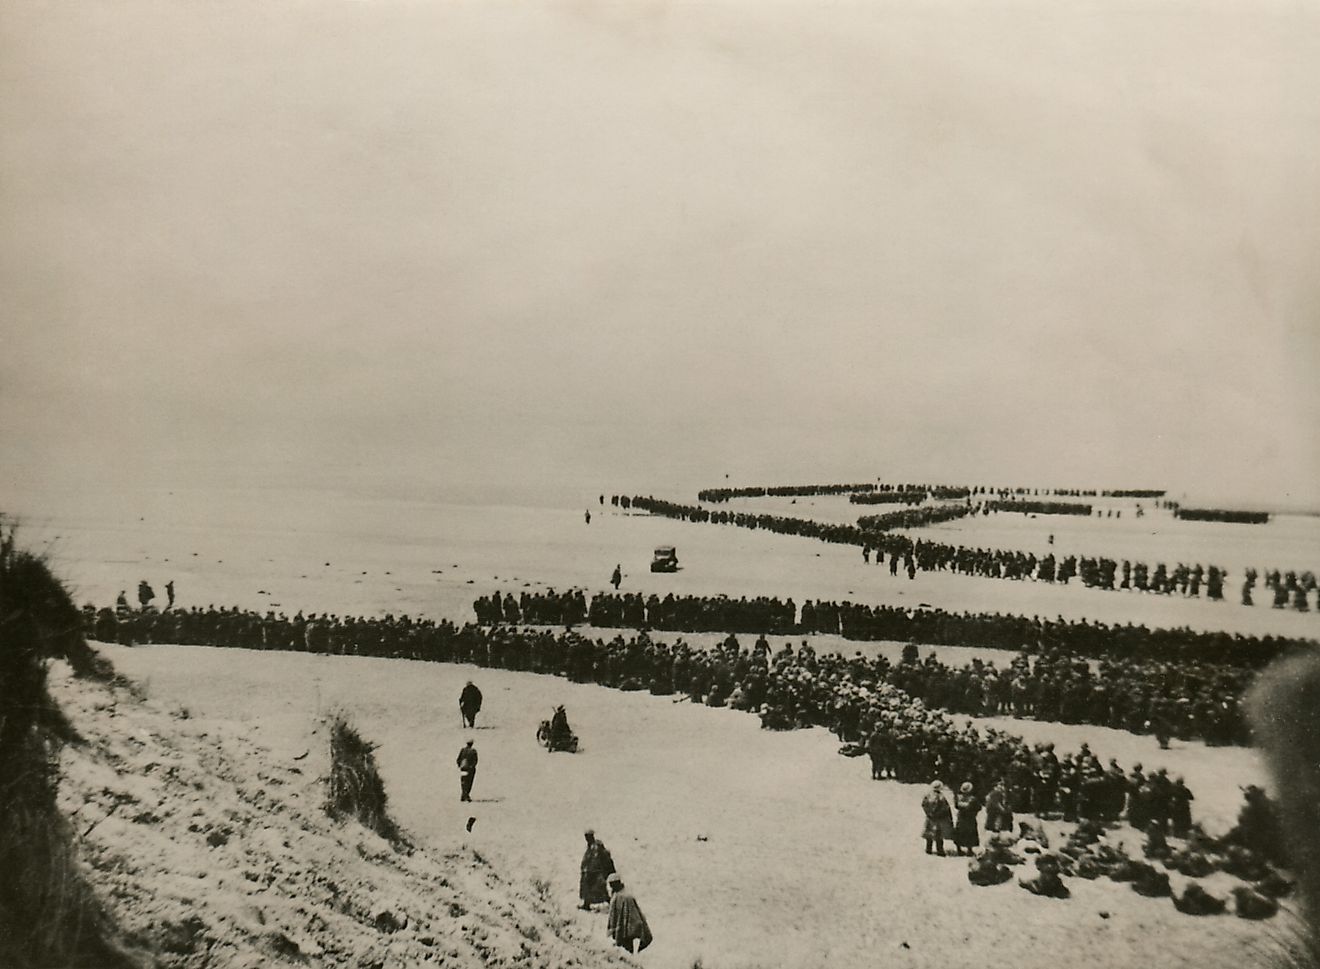 Military evacuation of Dunkirk during World War 2. Thousands of British and French troops wait on the dunes of Dunkirk beach for transport to England.